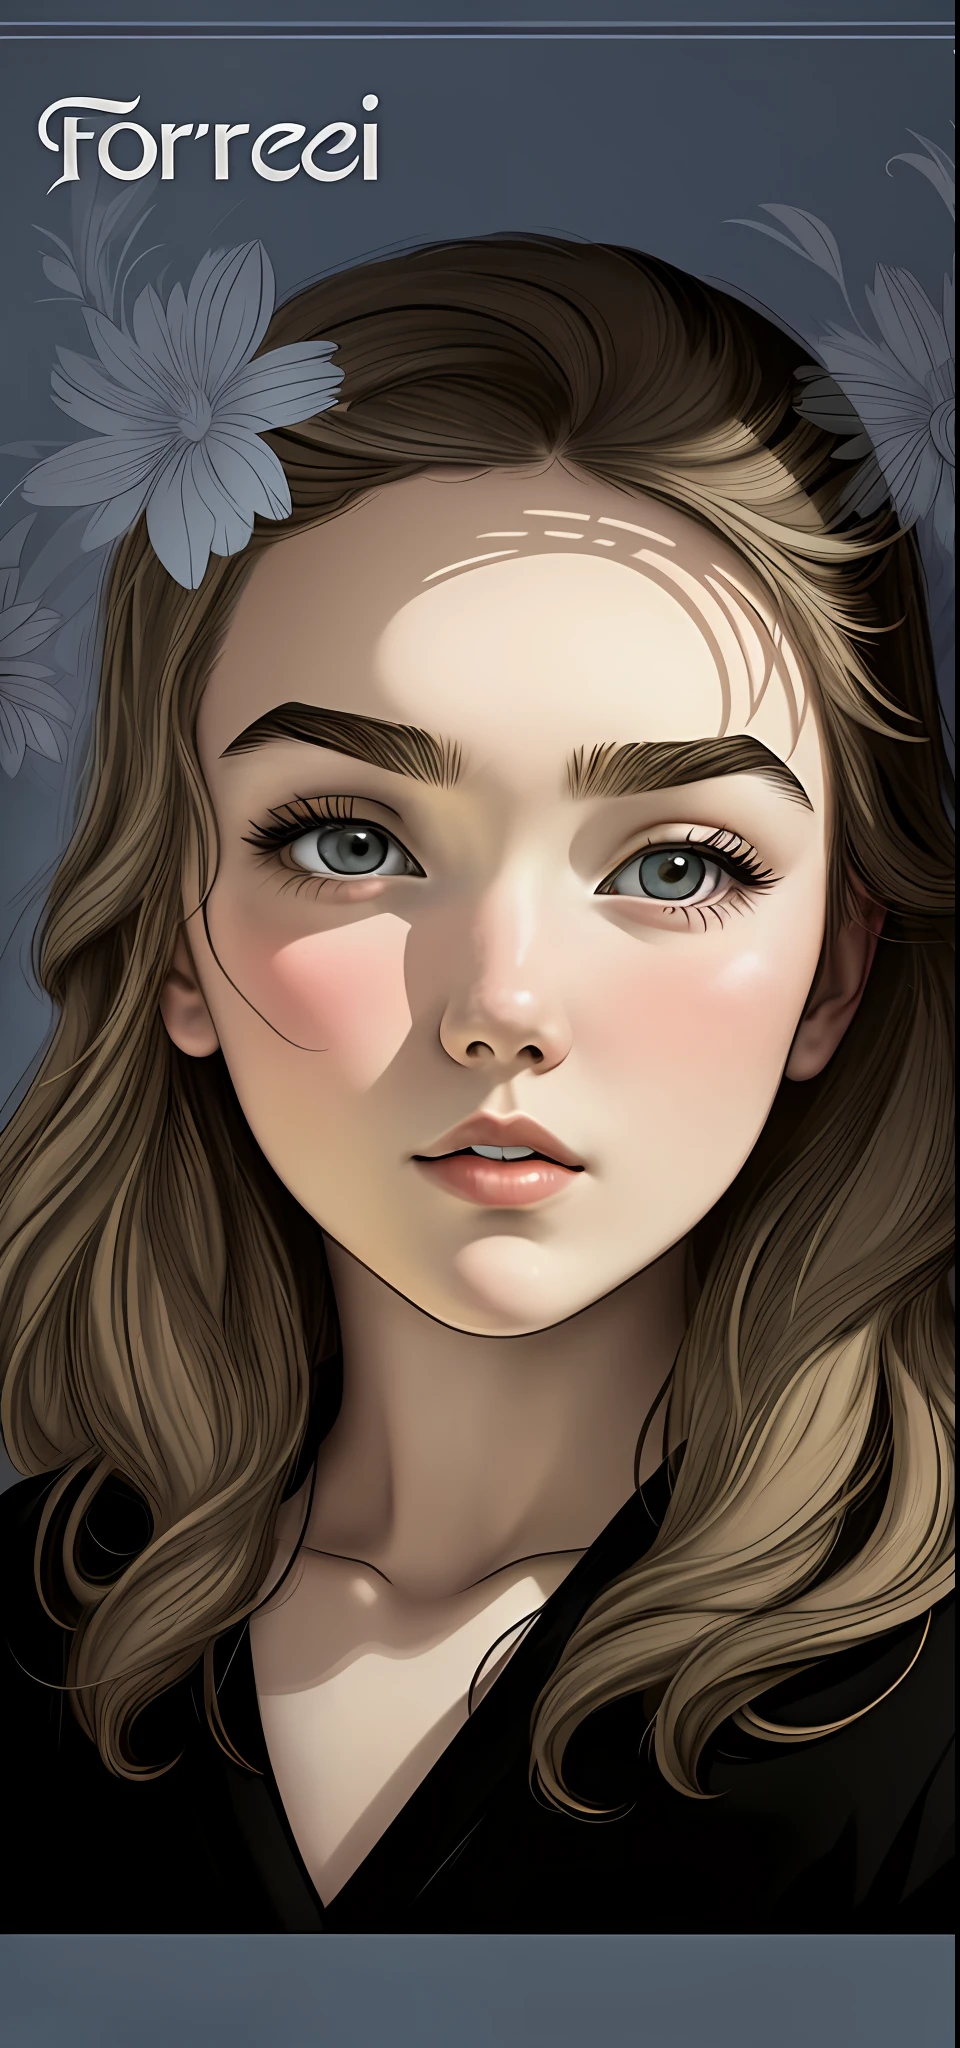 masterpiece, line art of a female character, Florence Pugh shocked expression, detailed country garden background, Art Deco designs,
style by double exposure, no shading, for coloring page, white space, no shadowing,